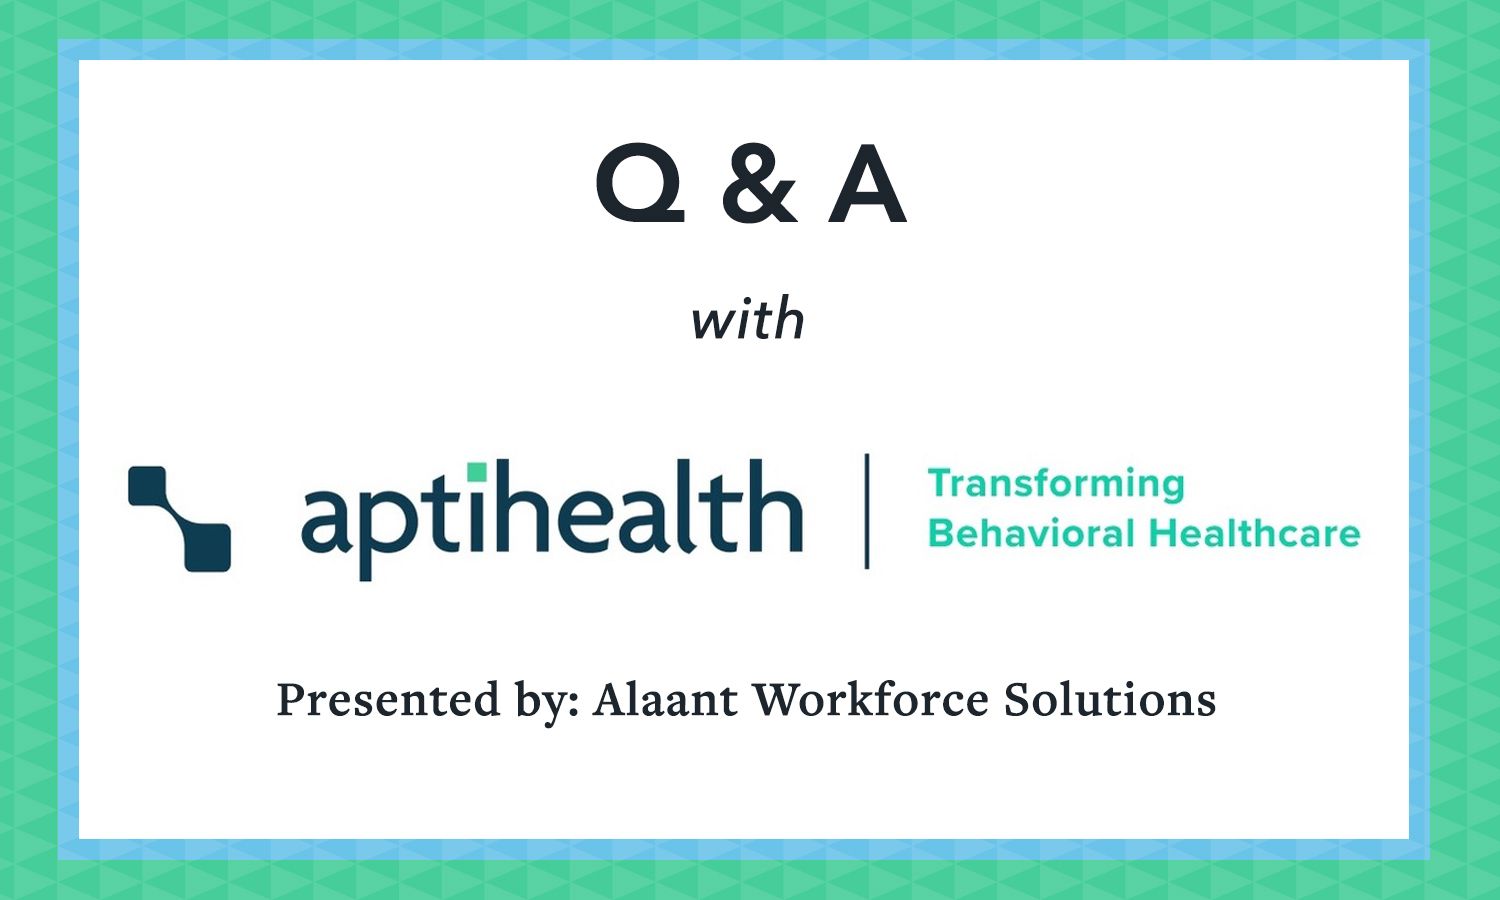 aptihealth Q&A Presented by Alaant Workforce Solutions